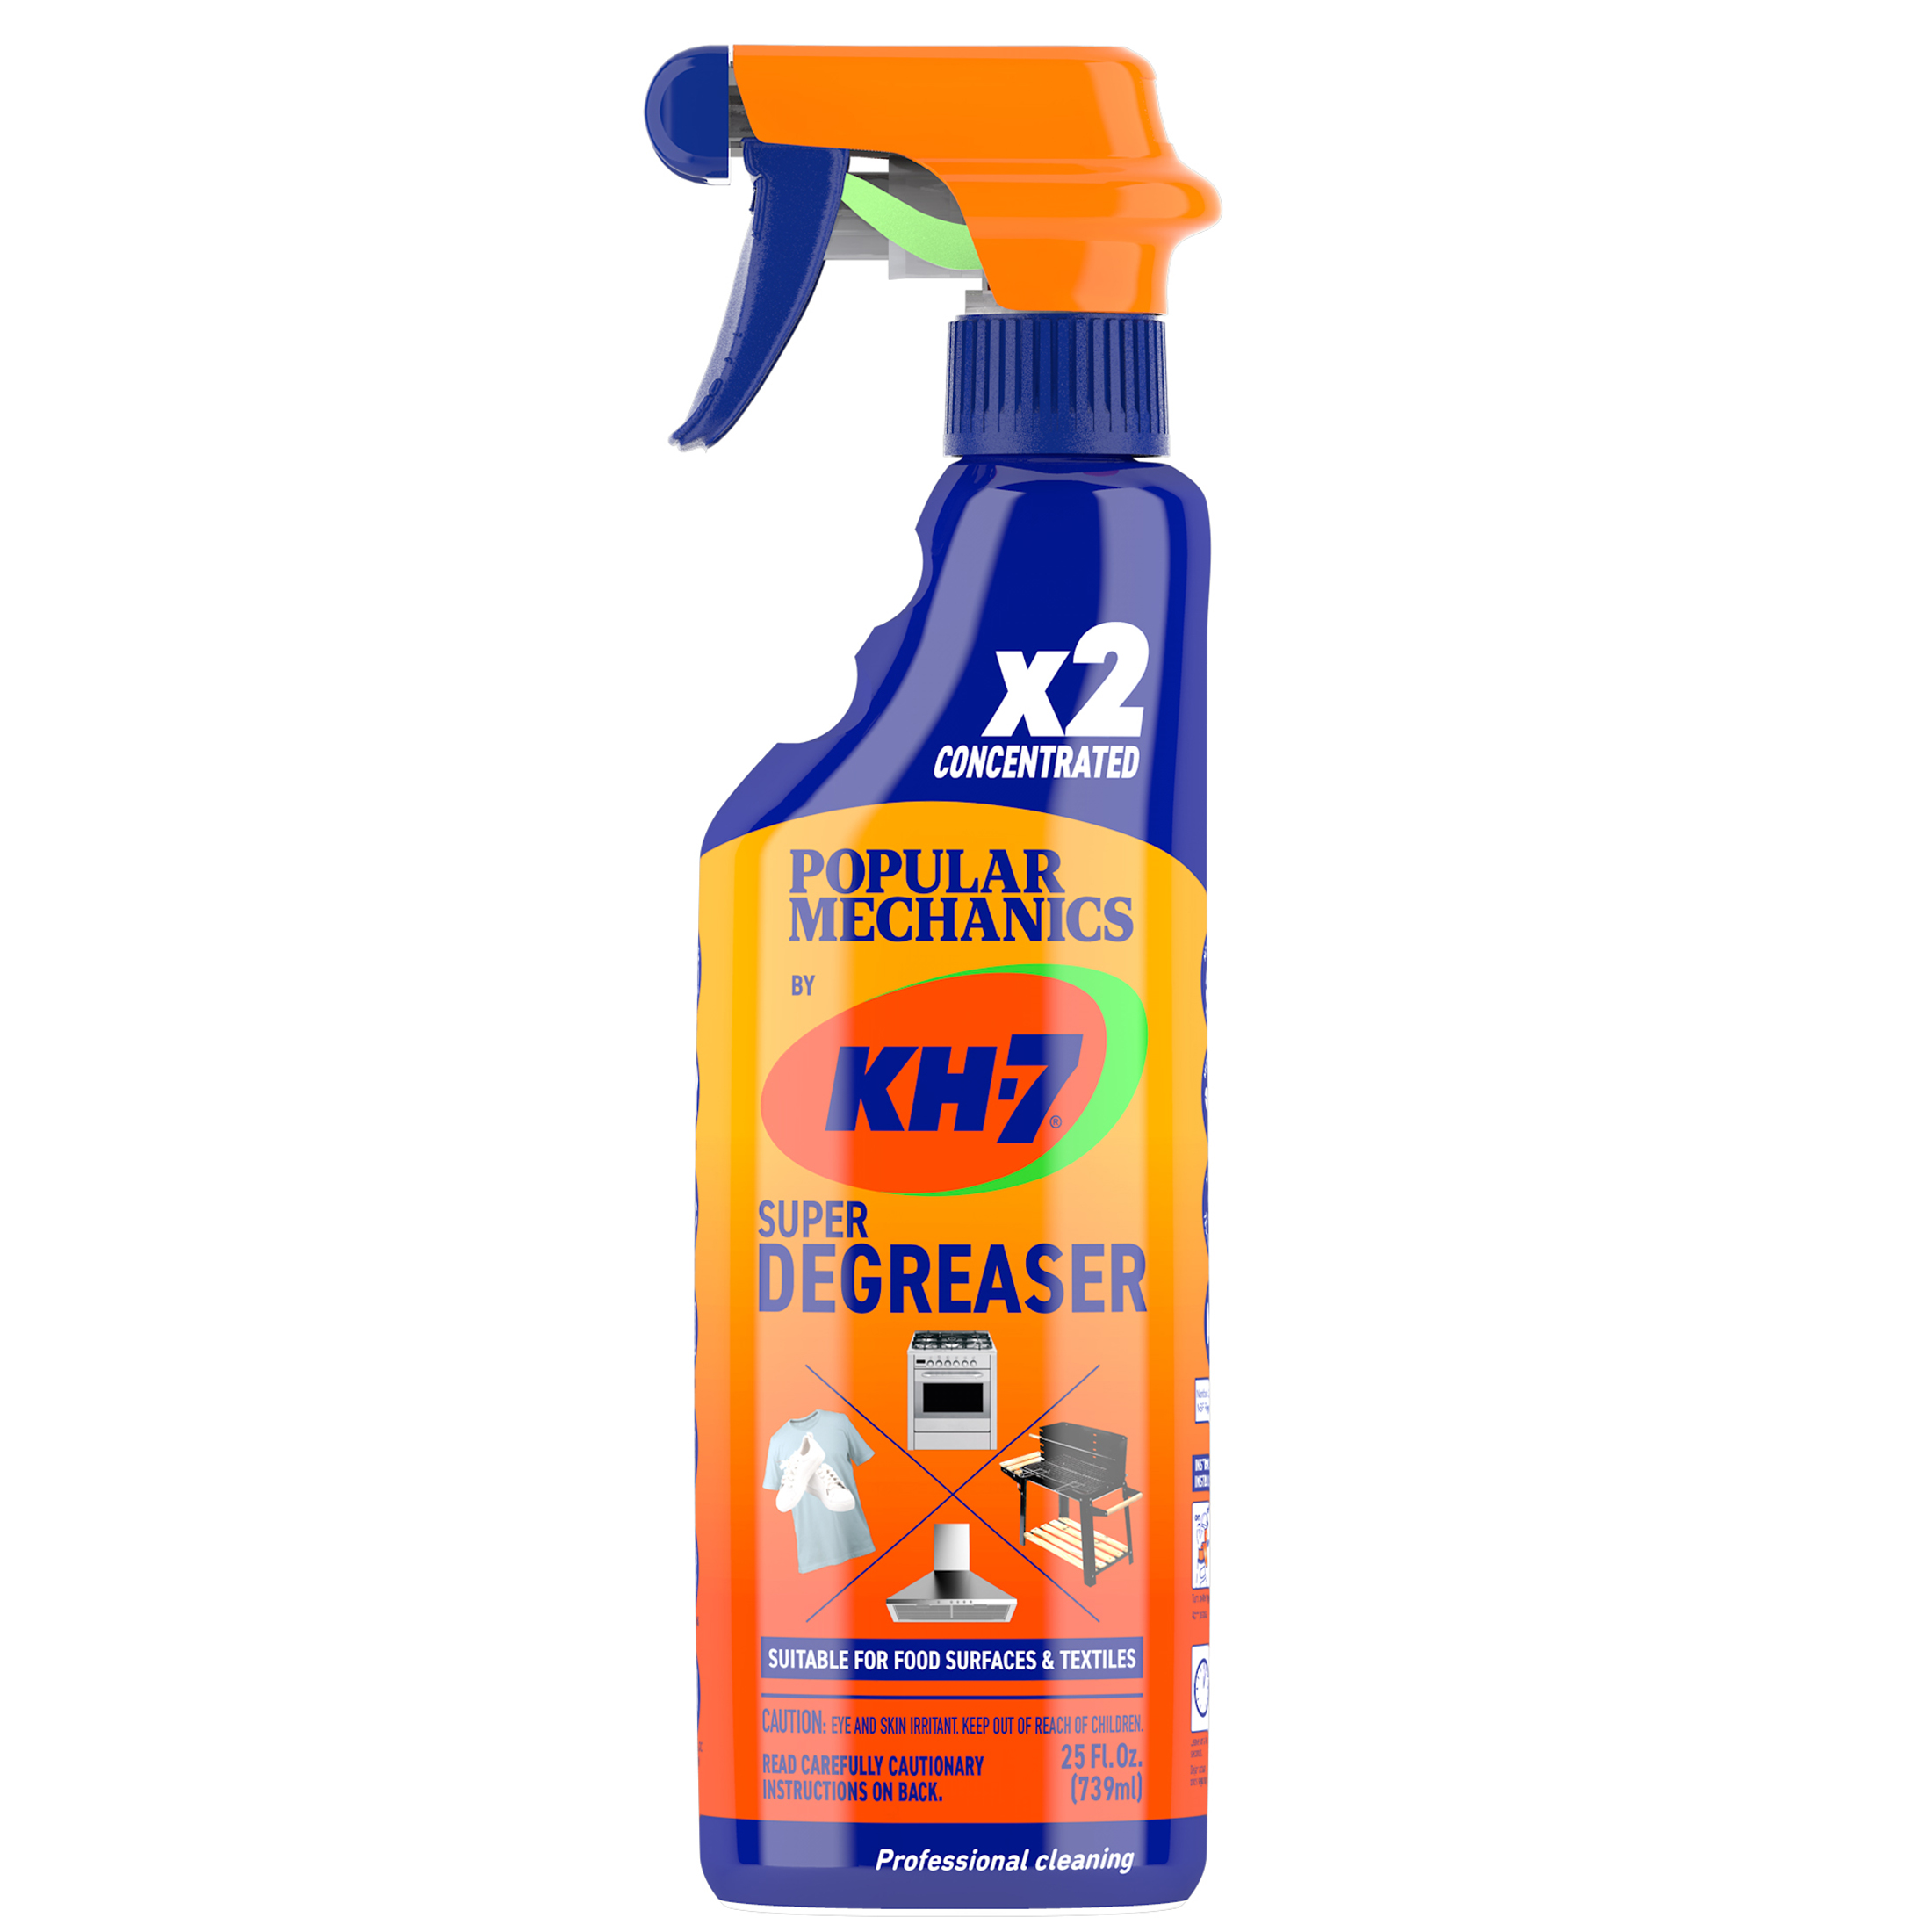 KH-7 Professional-Grade Concentrated Degreaser, All-Purpose Cleaner for Oven, Stove, Grill, Food Surfaces, Vehicles, Clothing & More, 25 oz - image 1 of 9